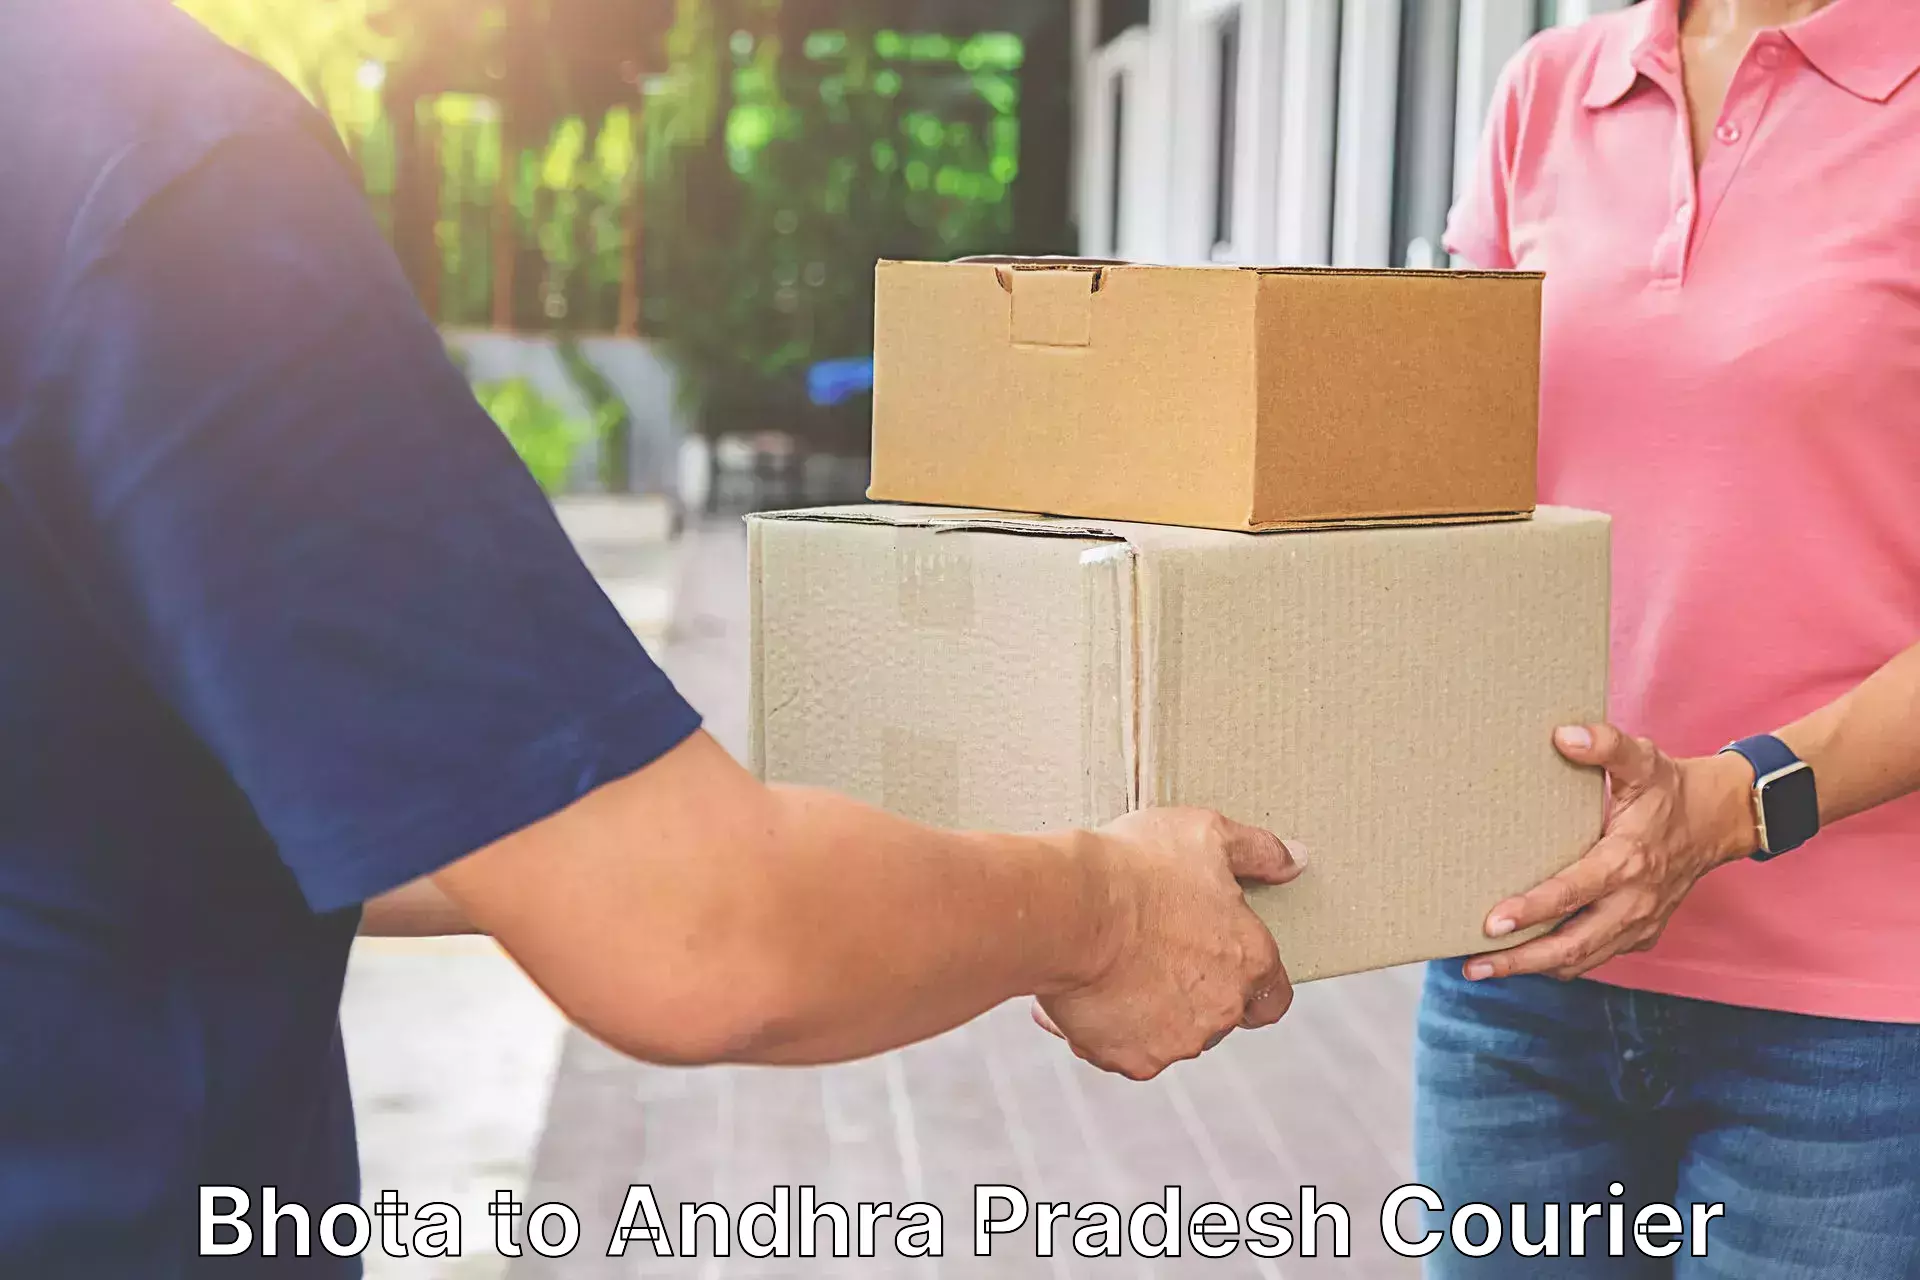 Express delivery network Bhota to Andhra Pradesh